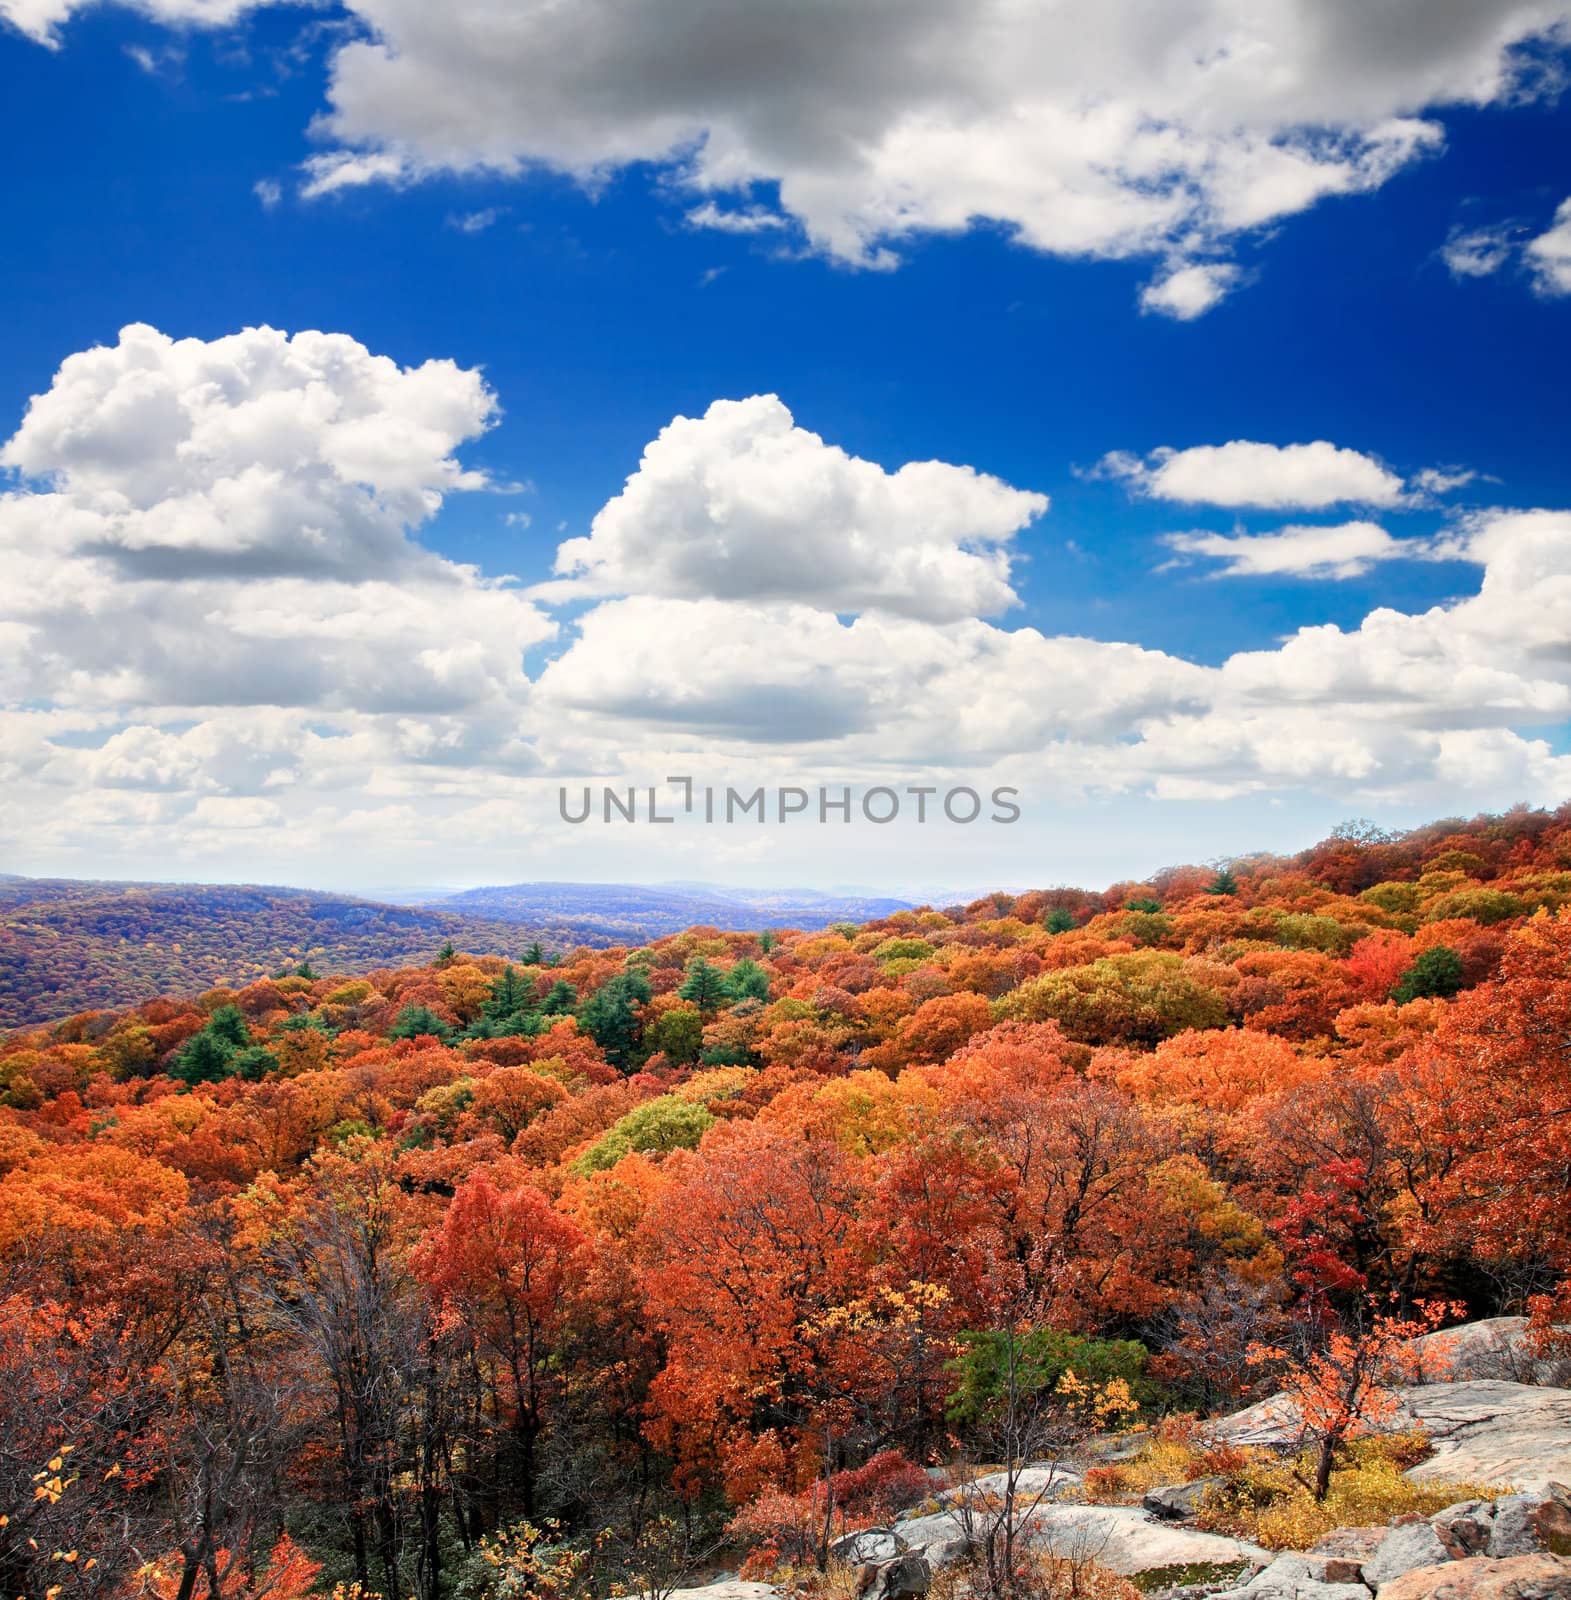 The foliage scenery from the top of Bear Mountain by gary718